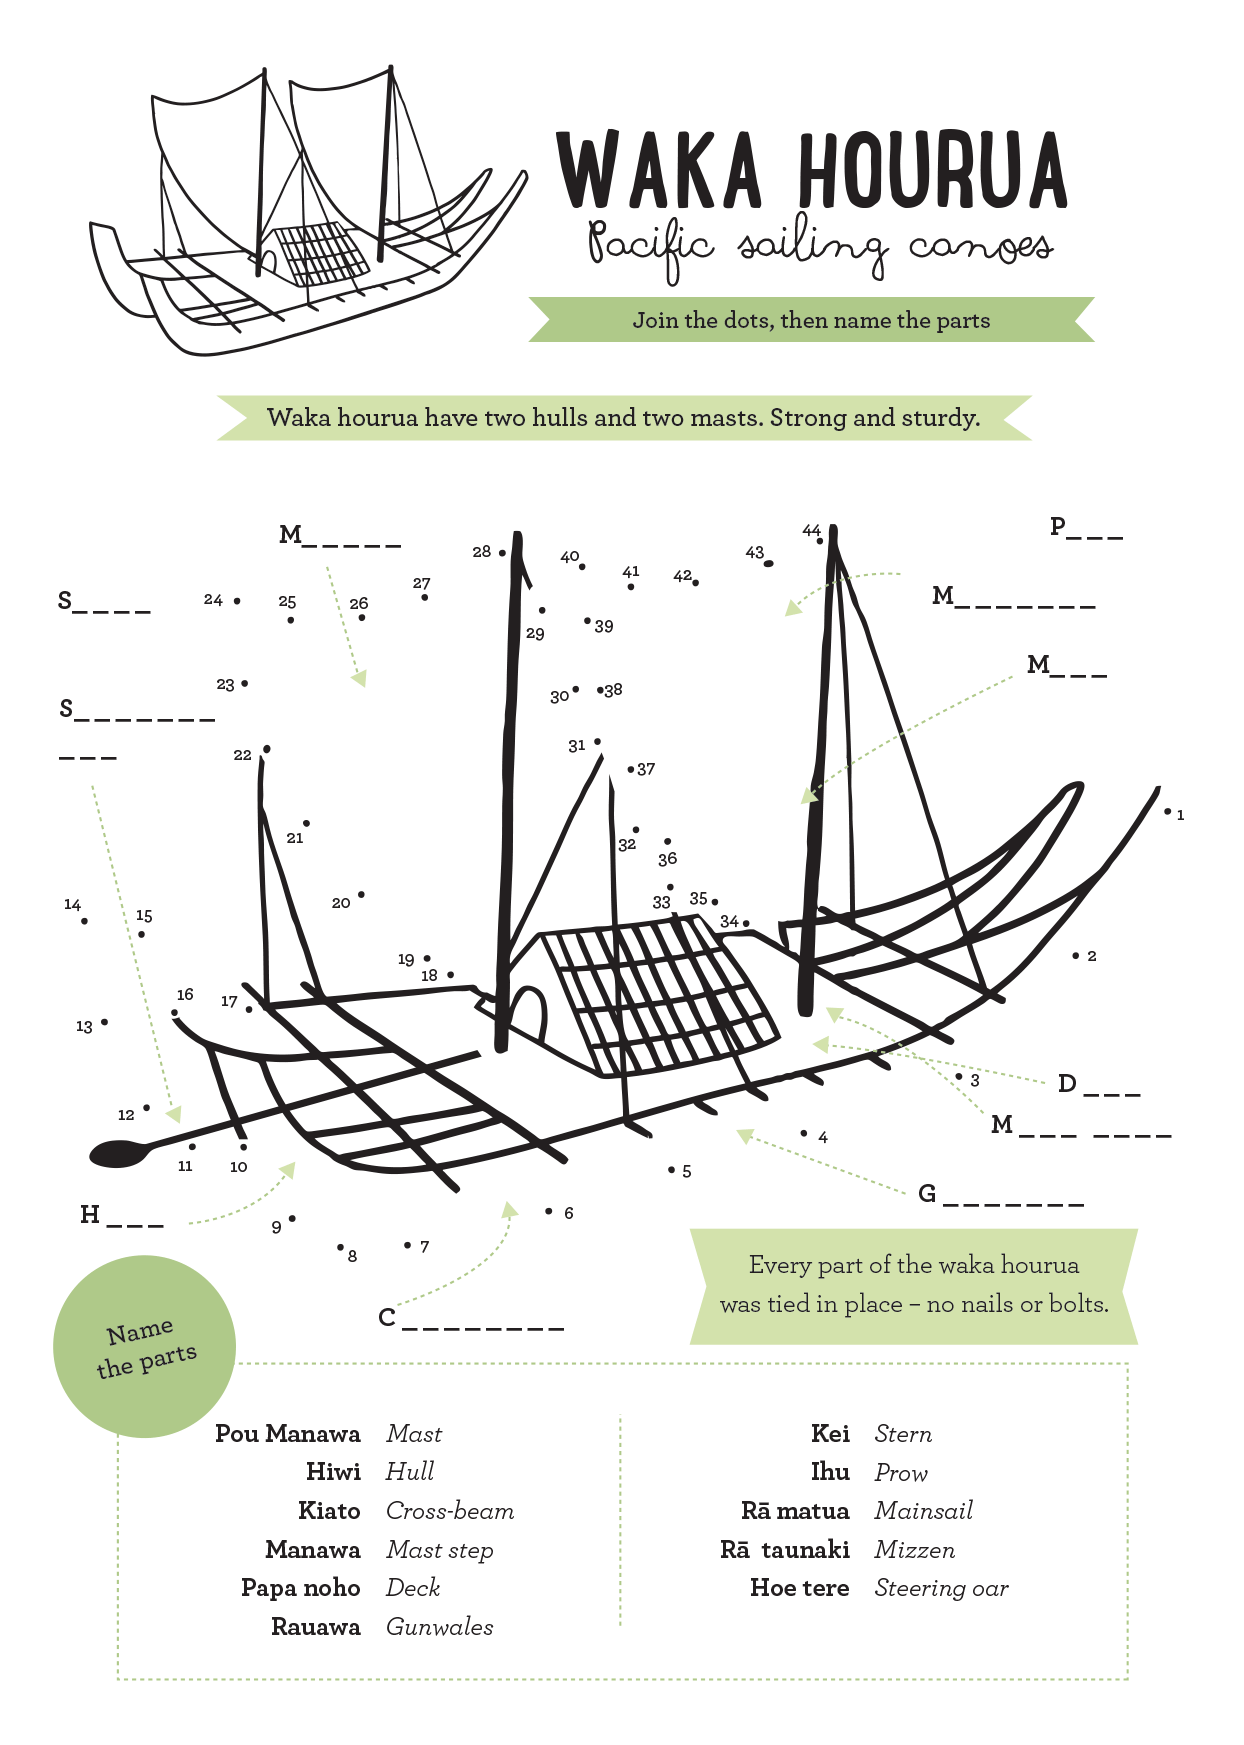 Partially illustrated waka hourua with numbered dots to guide students to complete the illustration. There are also incomplete names with arrows to different parts of the waka hourua. Part names are listed under 'Waka hourua — Pacific sailing canoes' on this page.